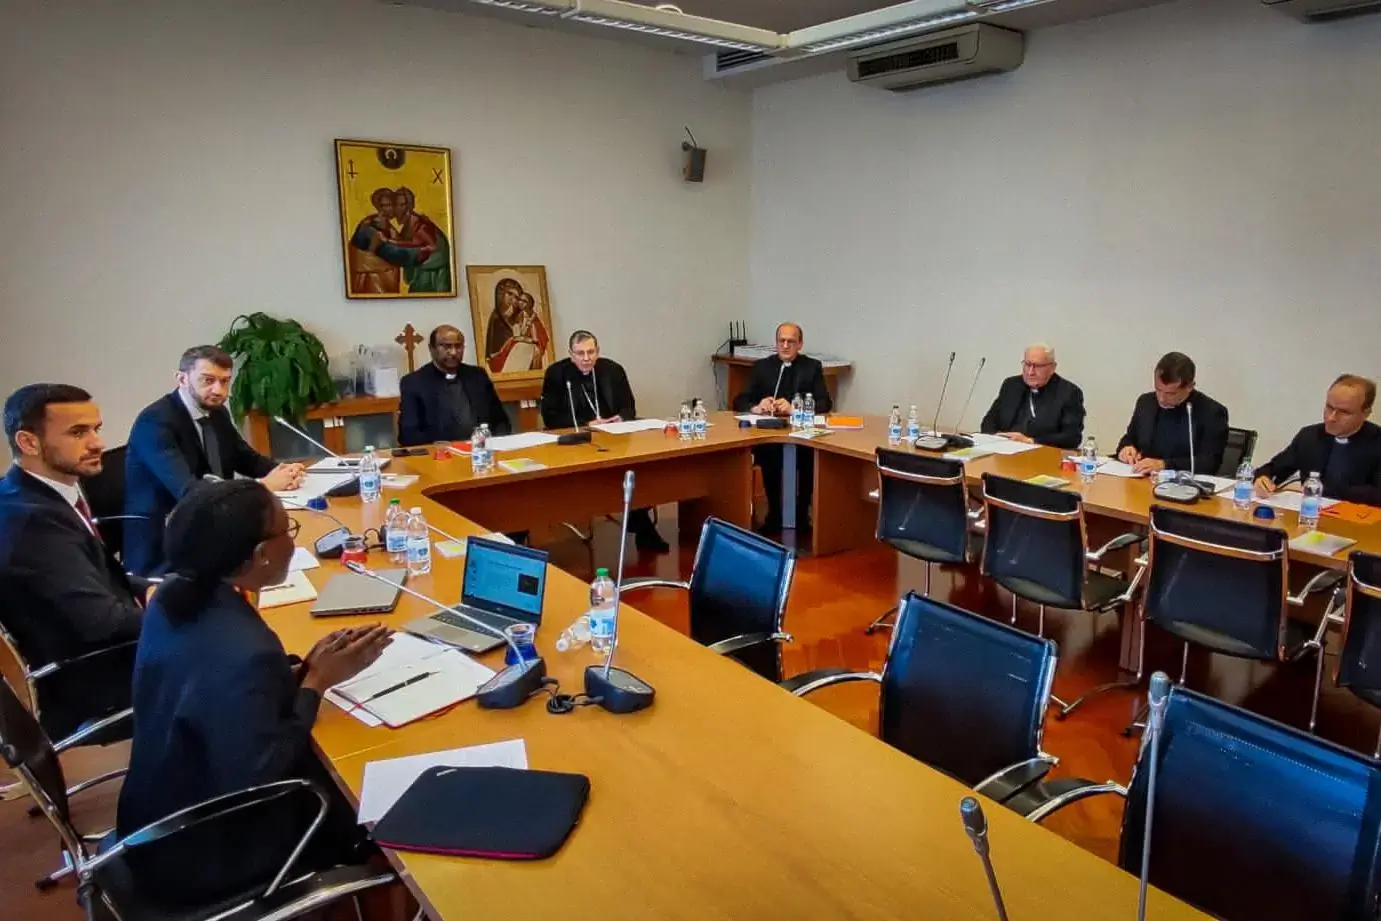 Leaders from the WCC and the Dicastery for Promoting Christian Unity met in Rome to plan for the period 2023-2030